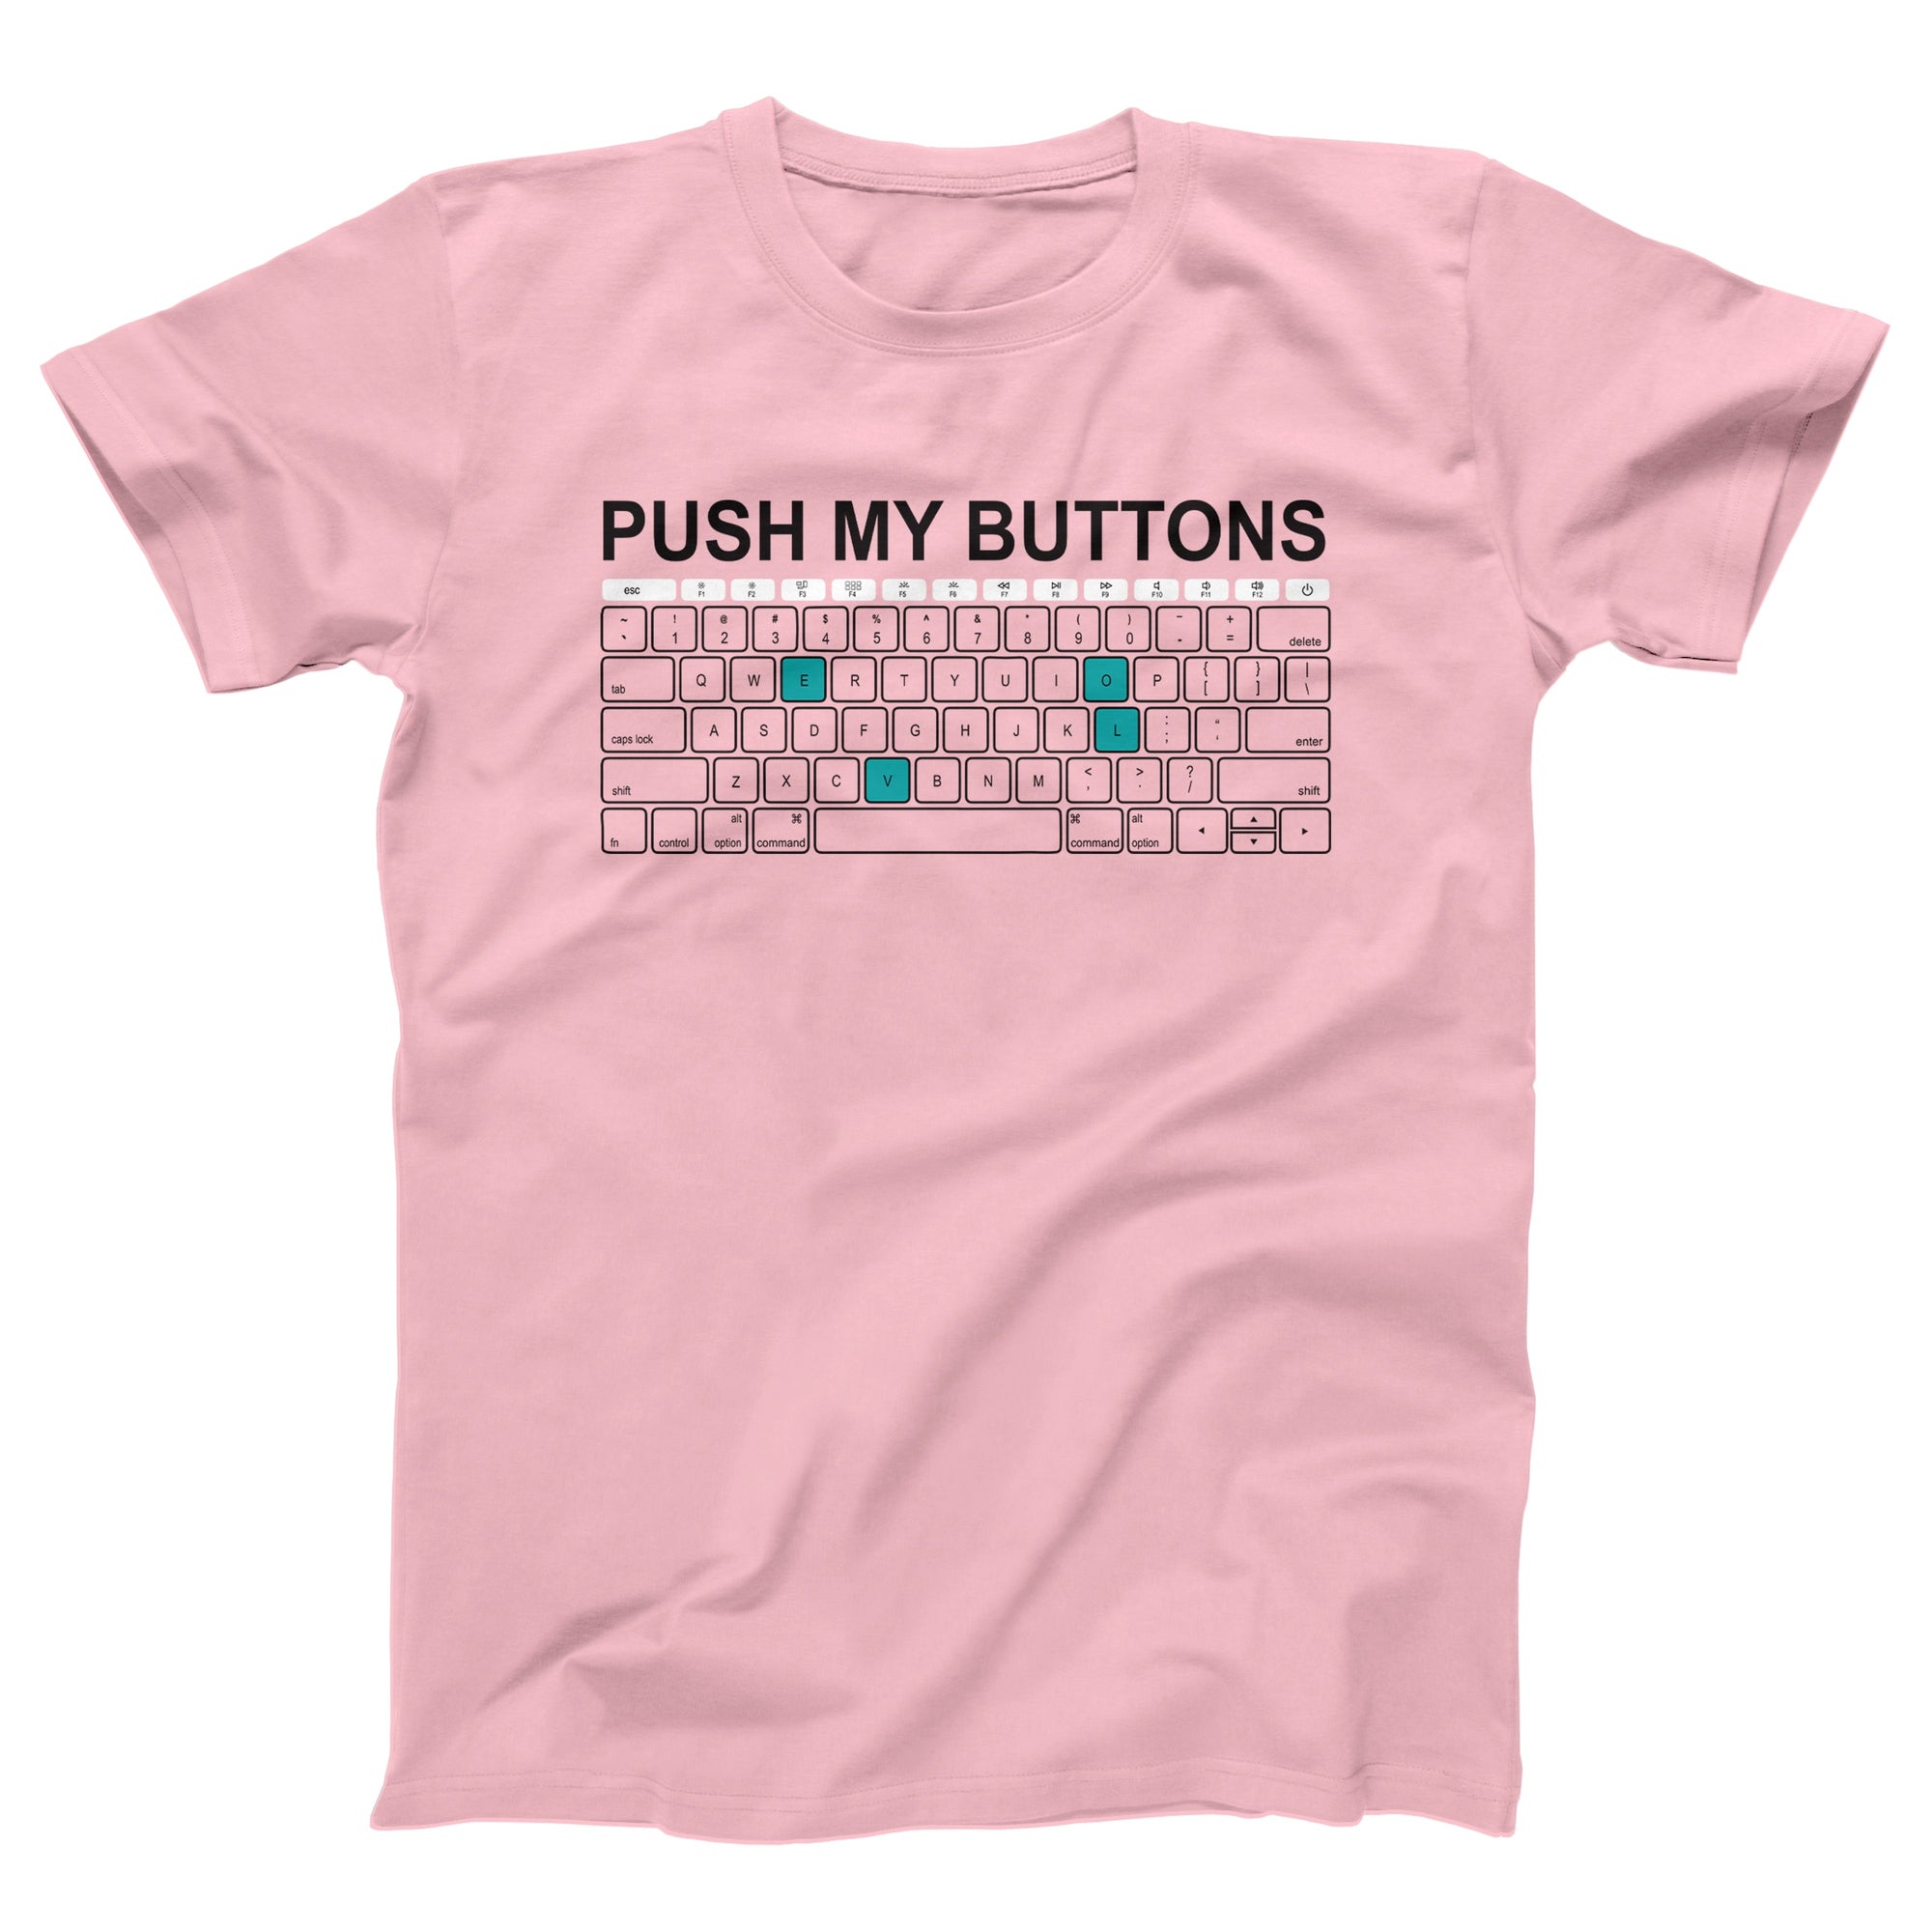 Push My Buttons Adult Unisex T-Shirt - Twisted Gorilla